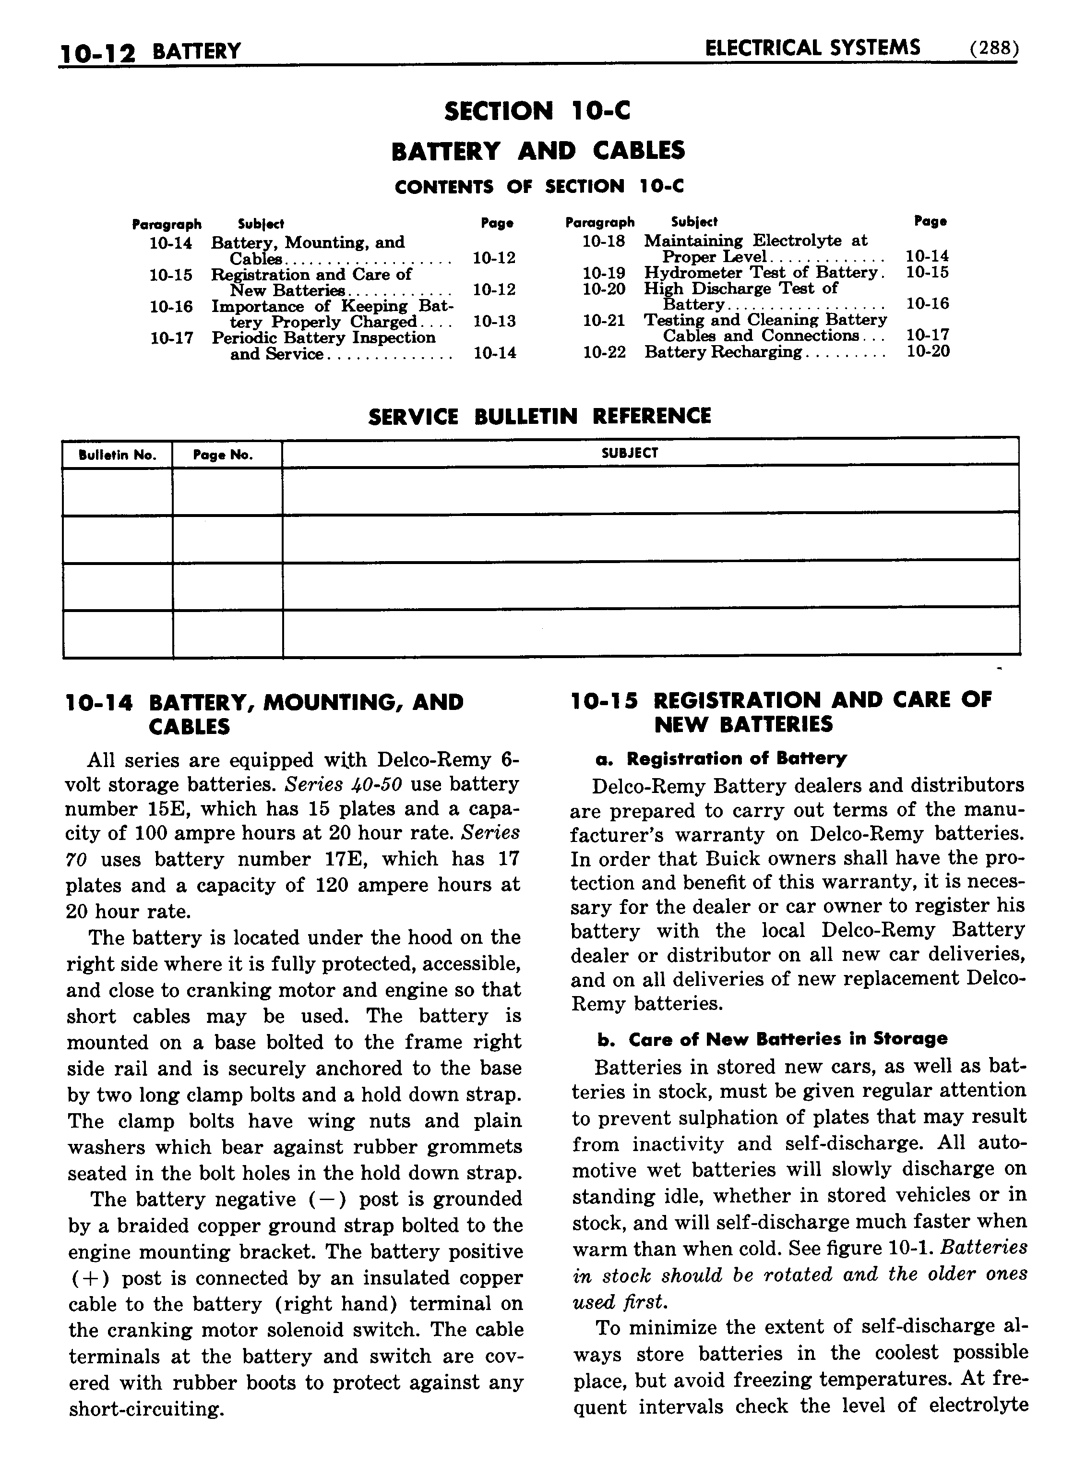 n_11 1948 Buick Shop Manual - Electrical Systems-012-012.jpg